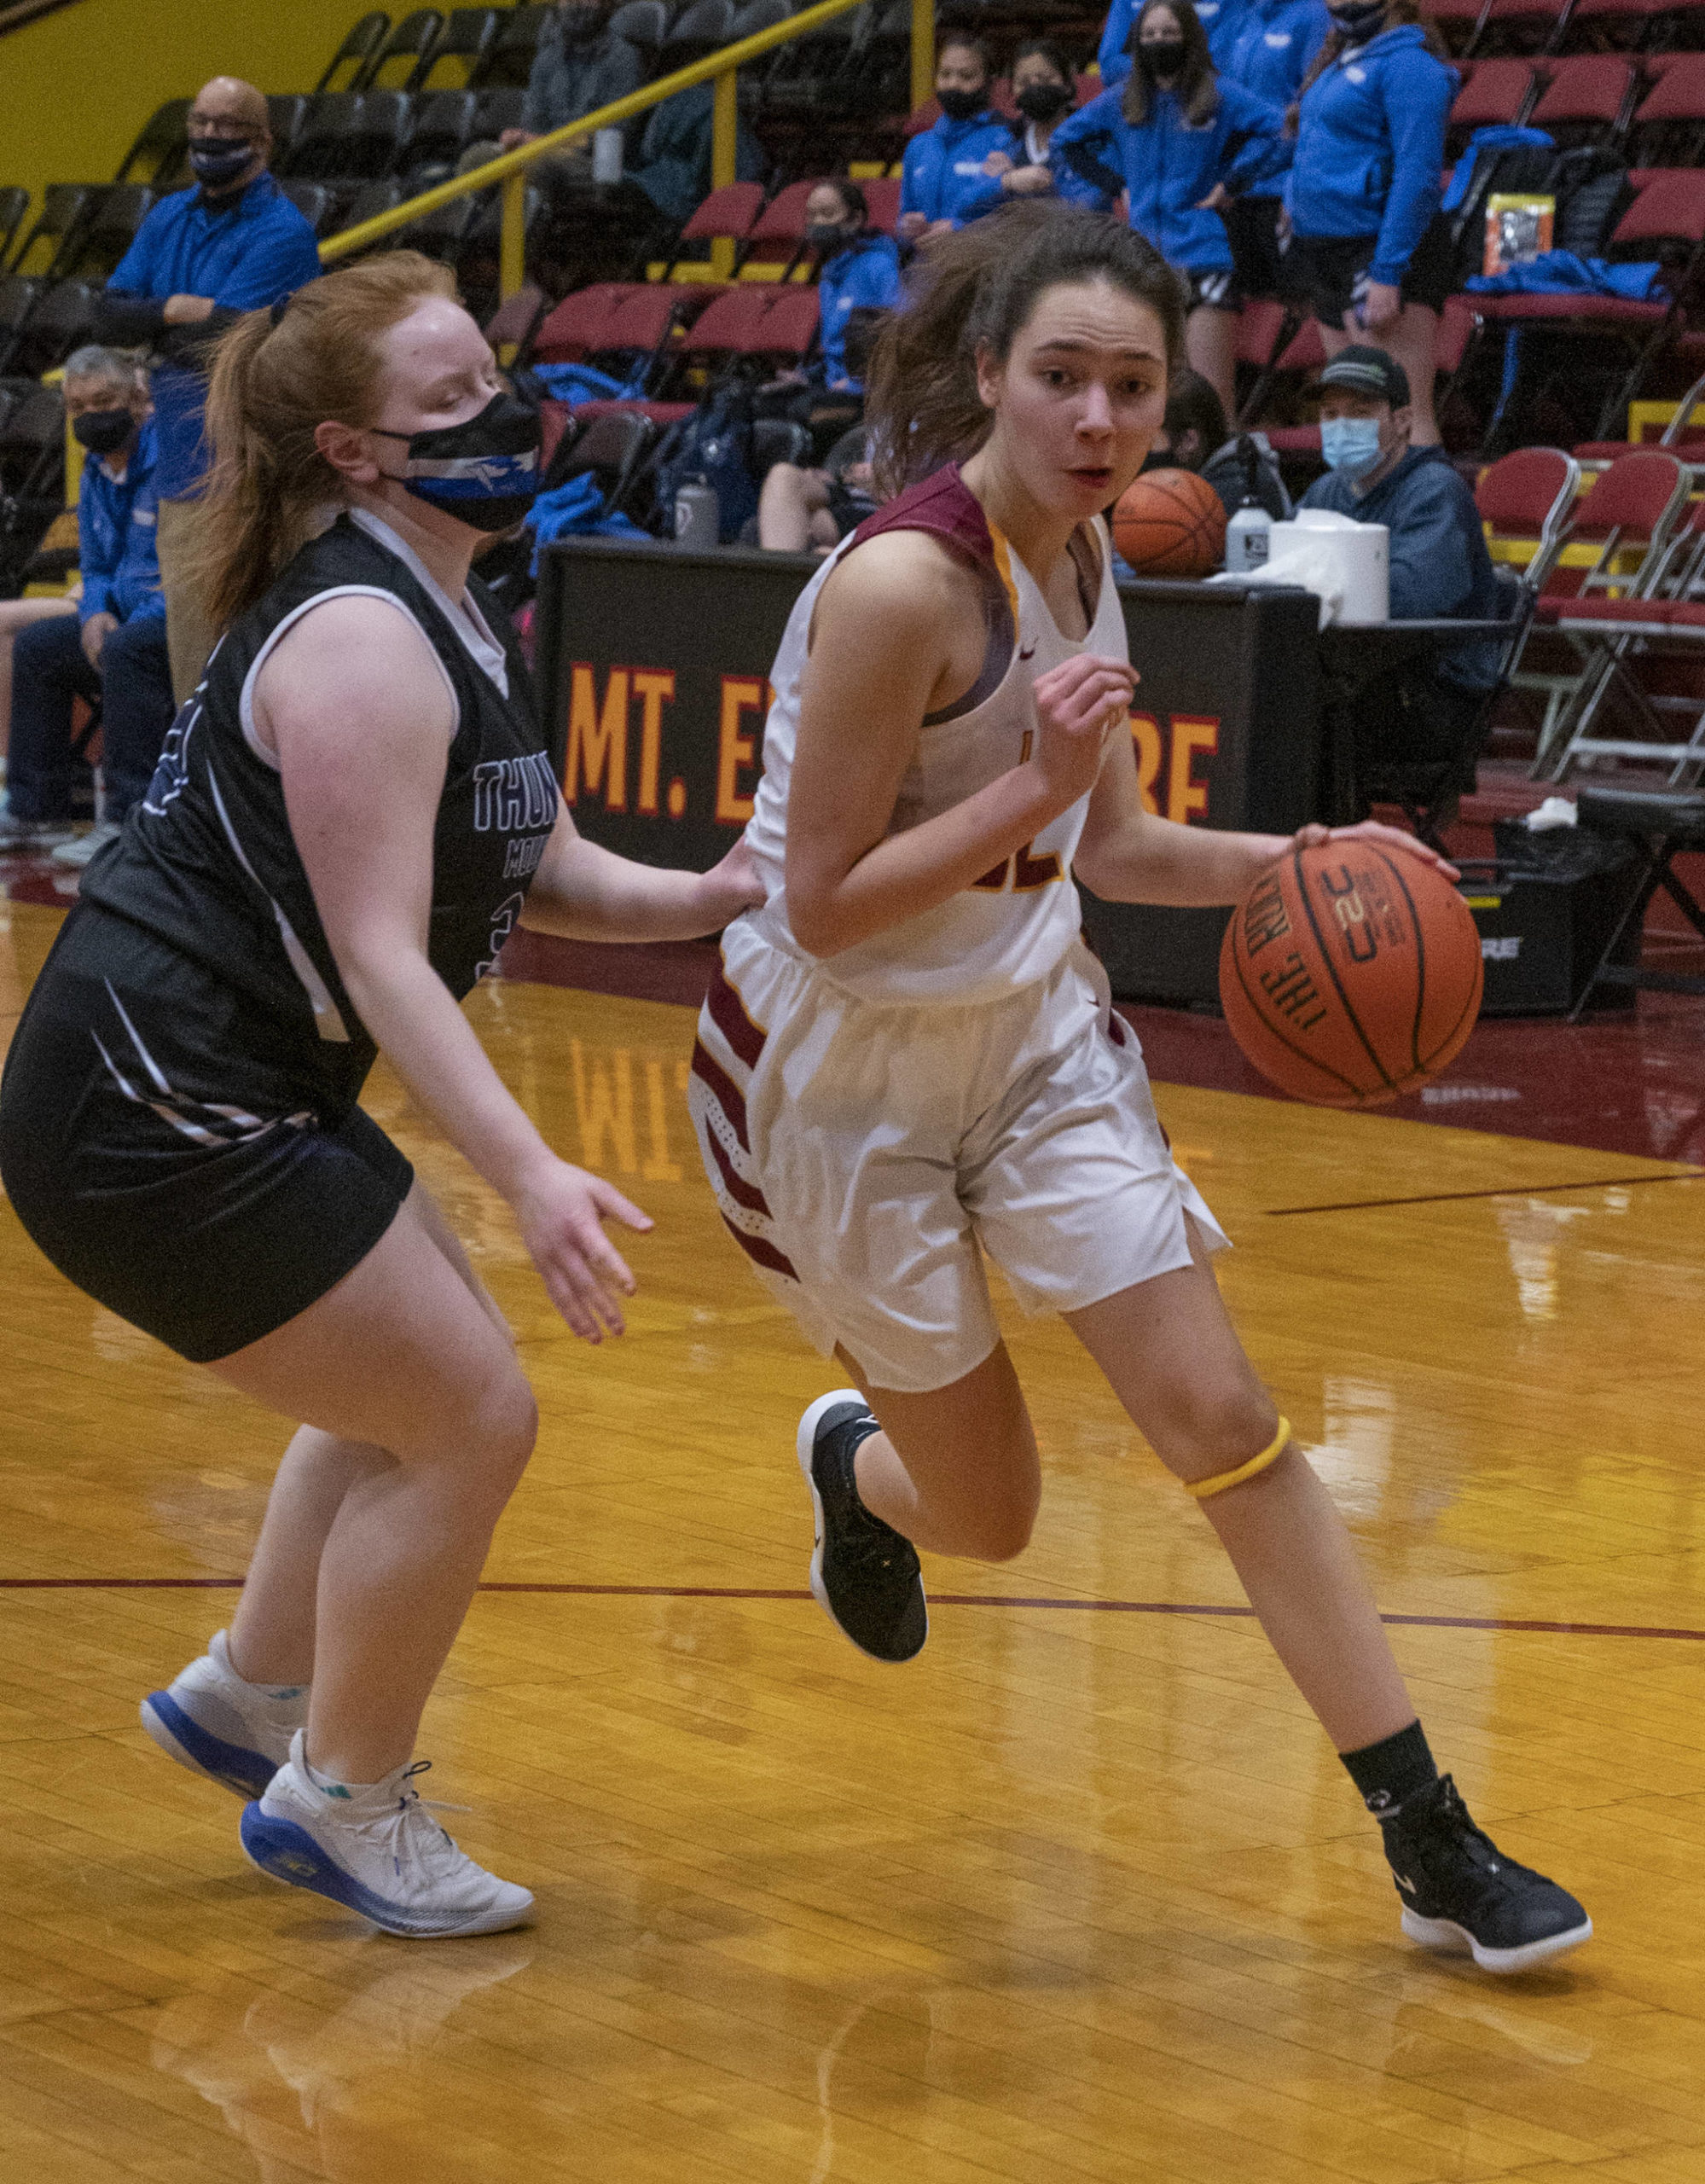 Thunder Mountain High School player Mackenzie Gray, left, competes against Mt. Edgecumbe High School in Sitka on Saturday, Feb. 6, 2021. (Sitka Sentinel / James Poulson)